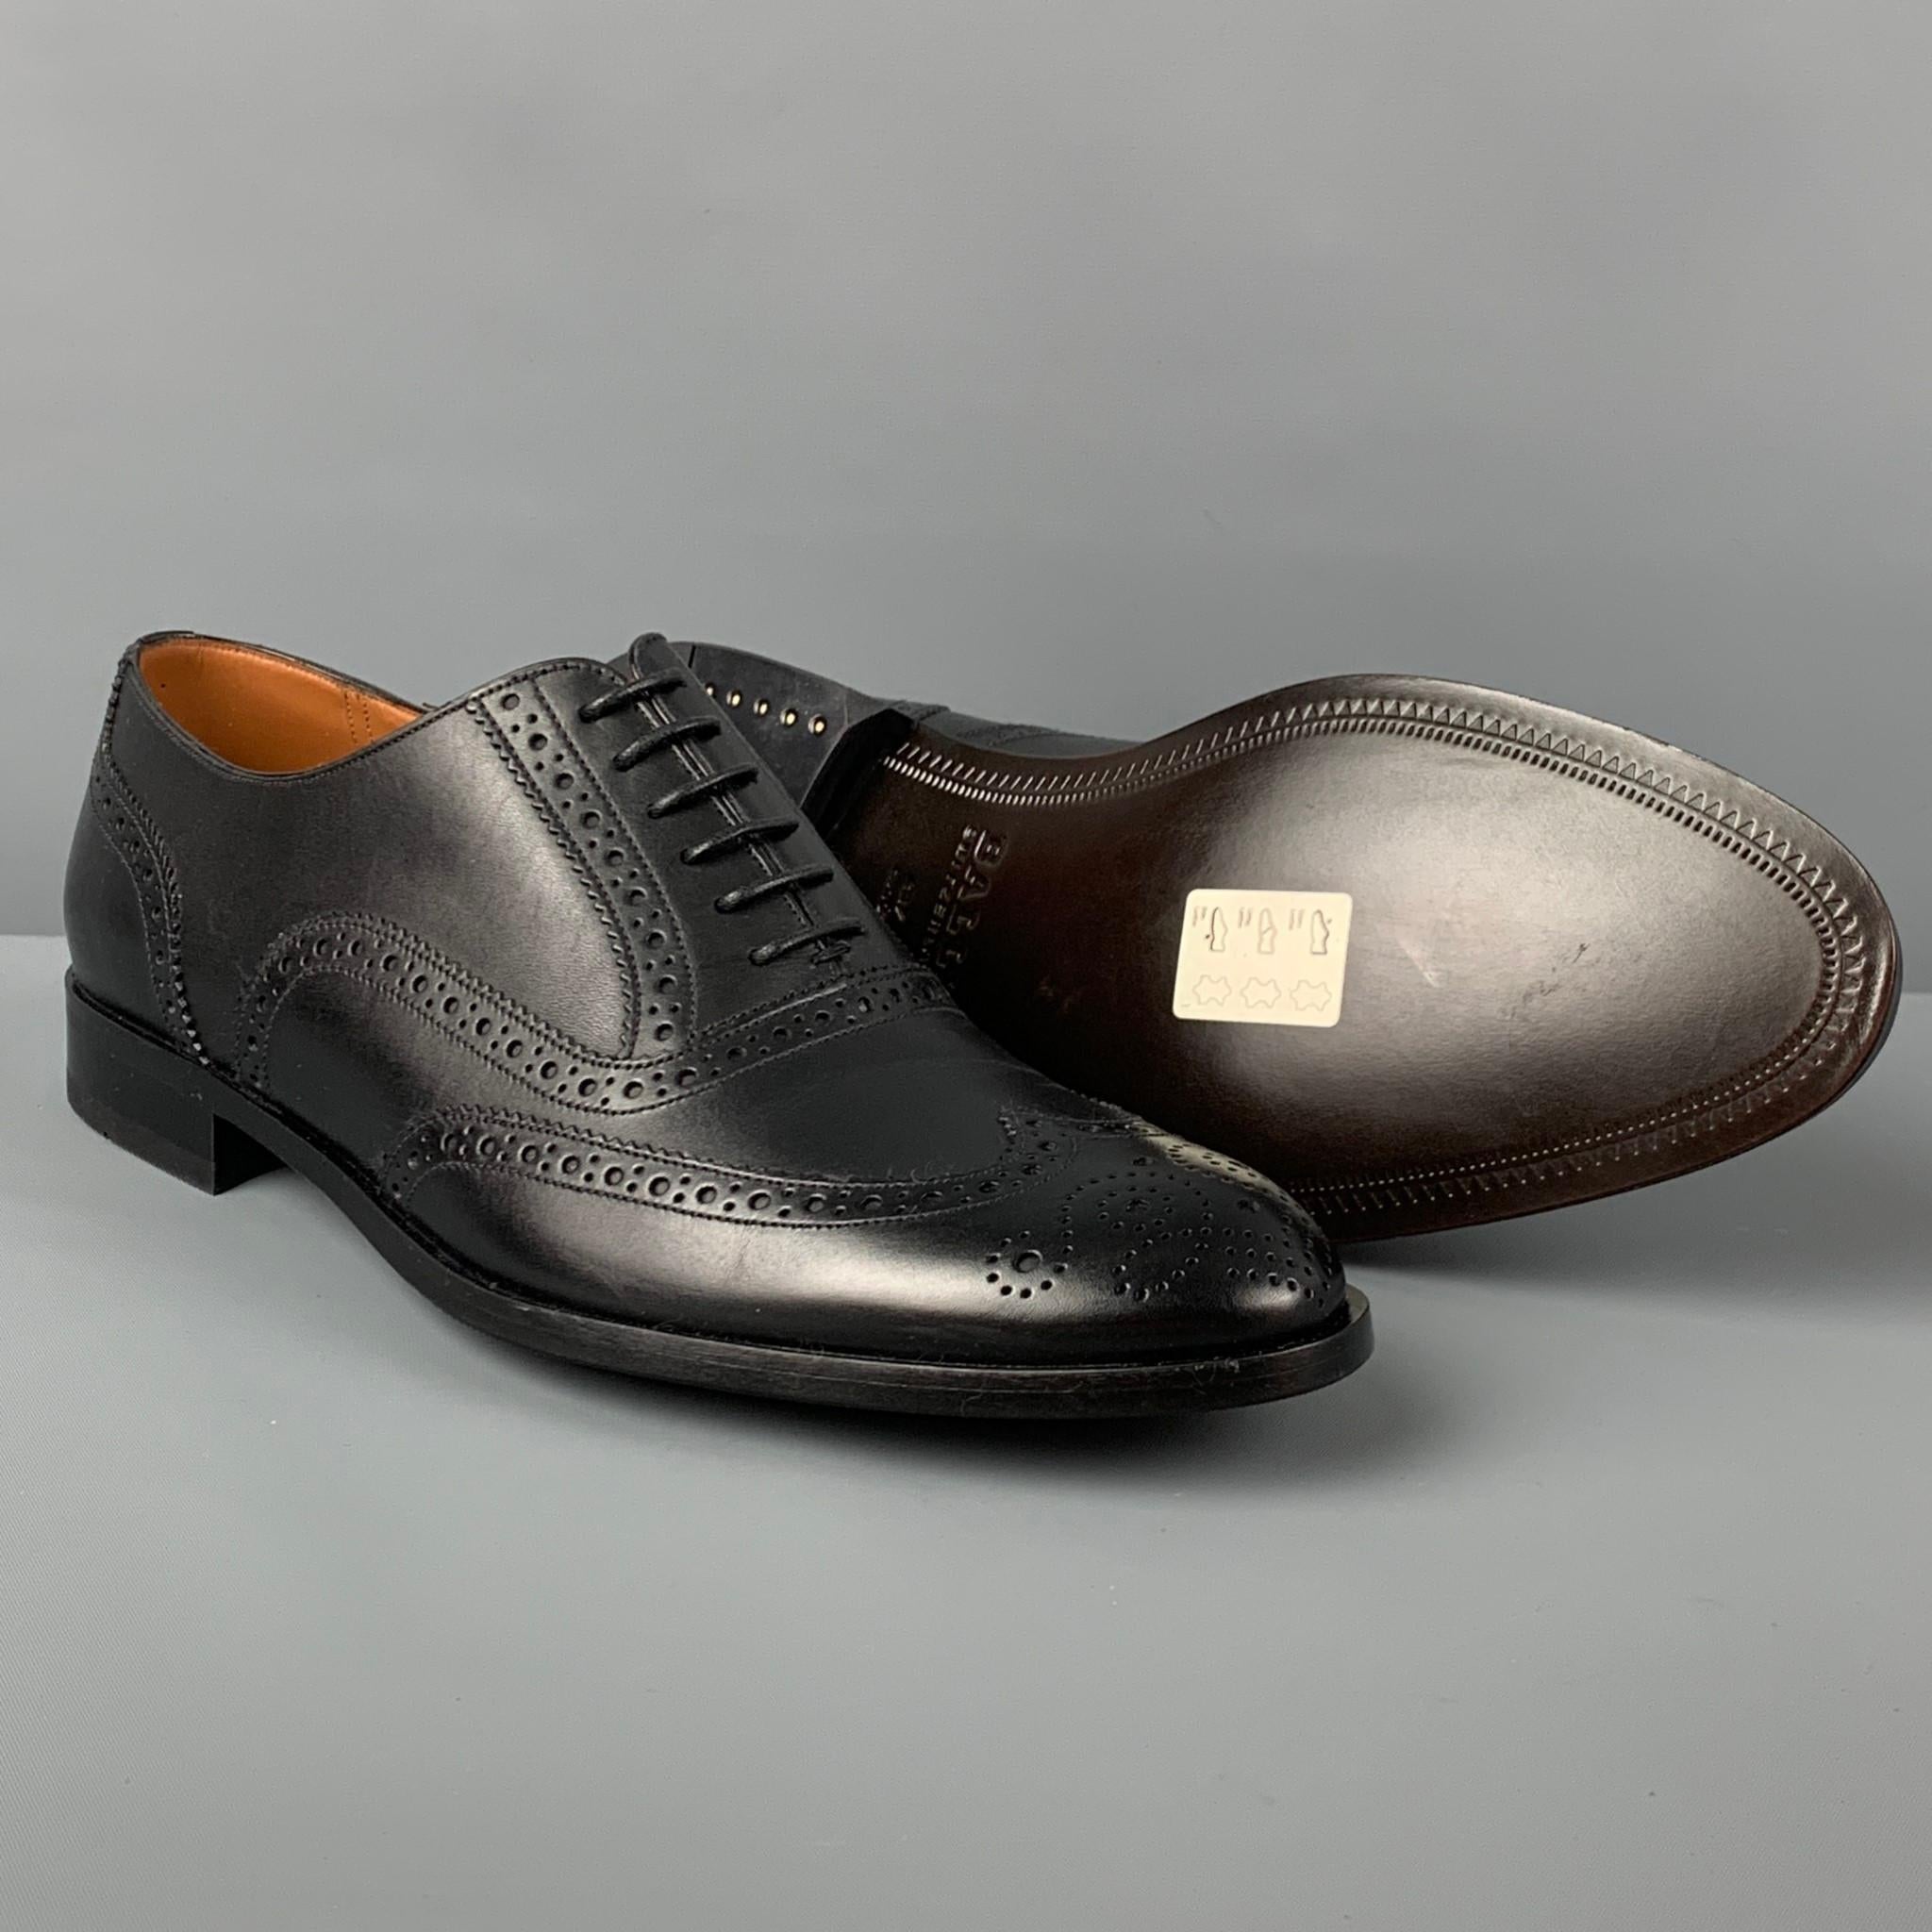 bally shoes made in switzerland